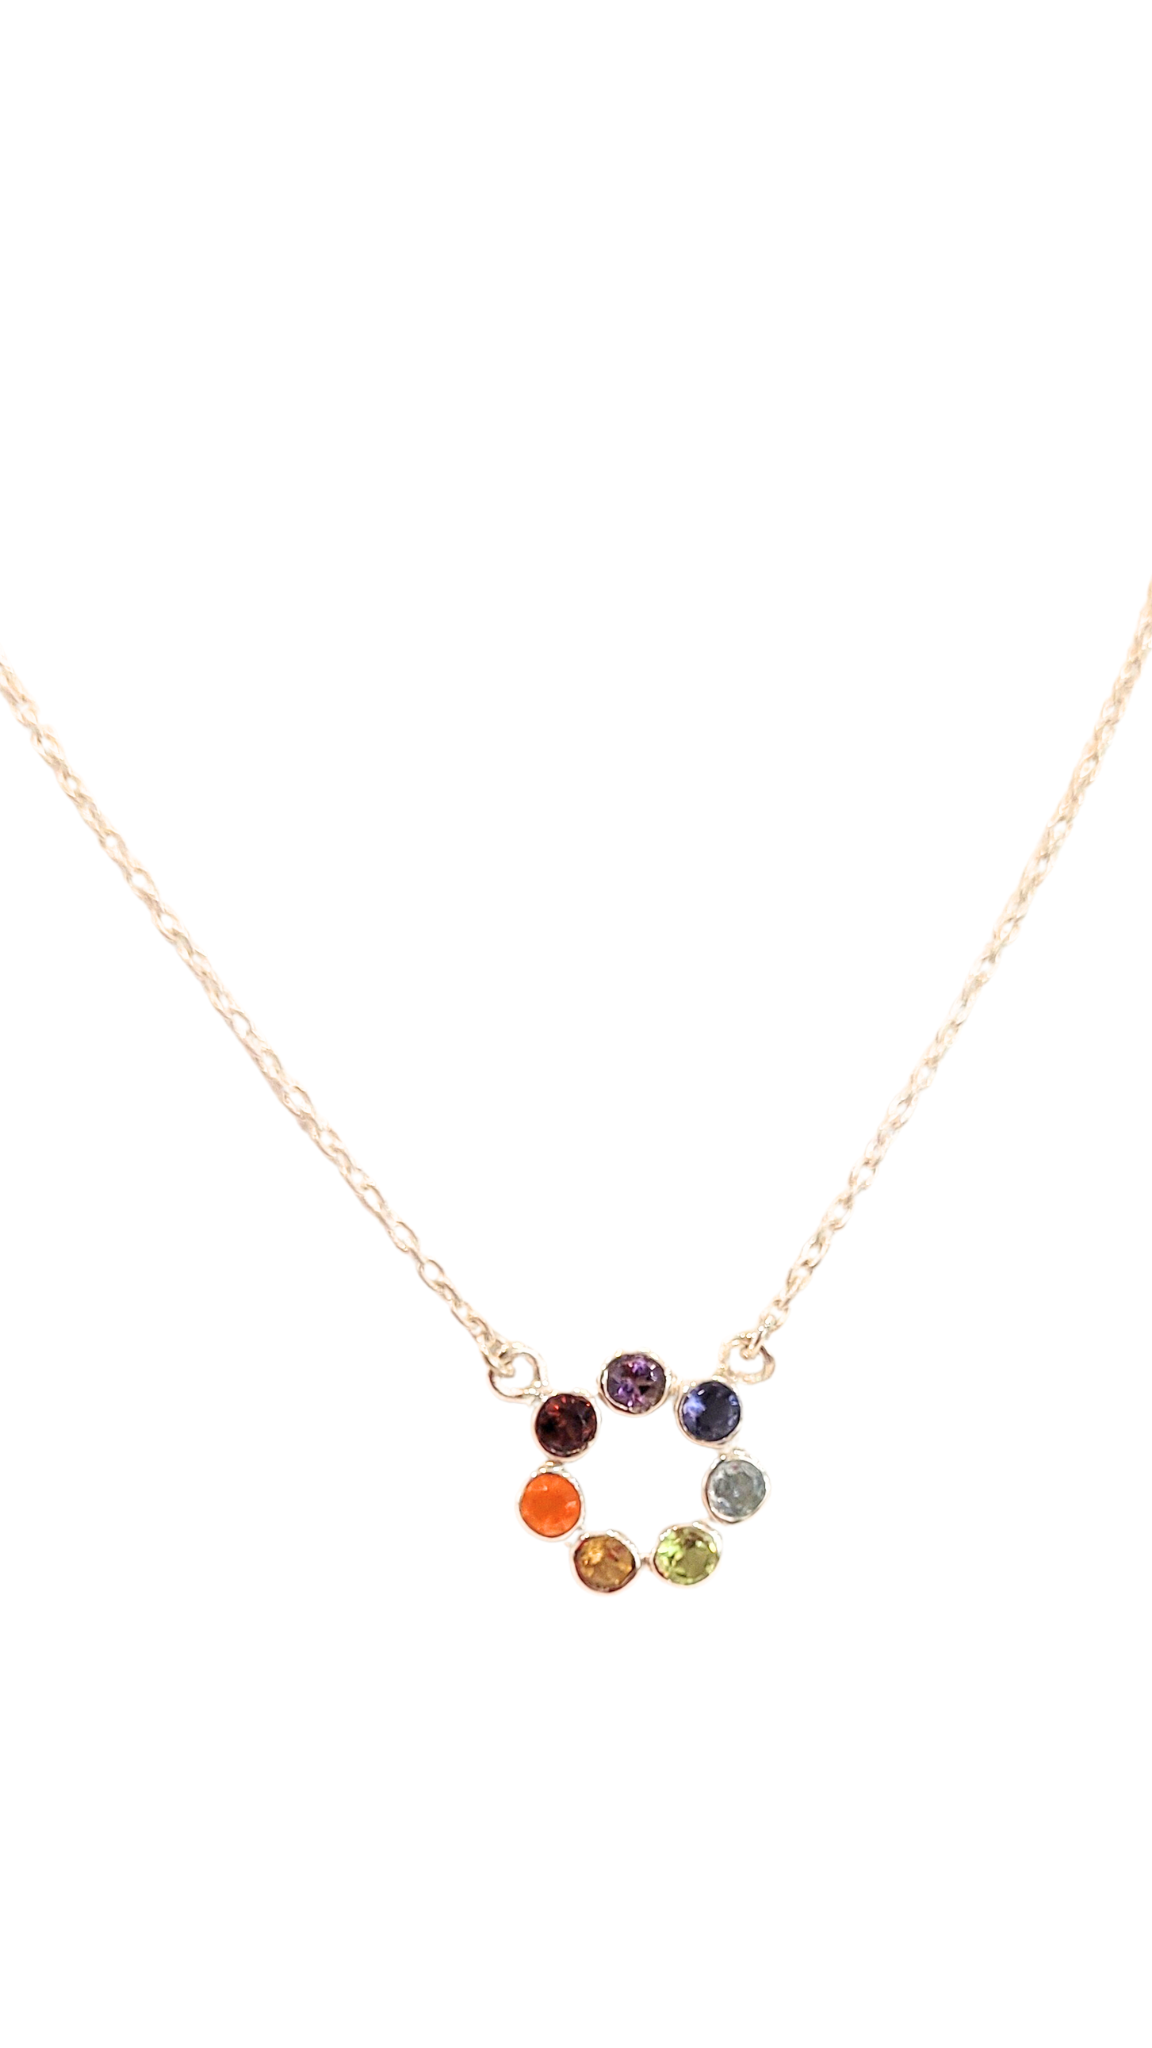 Necklace - N121